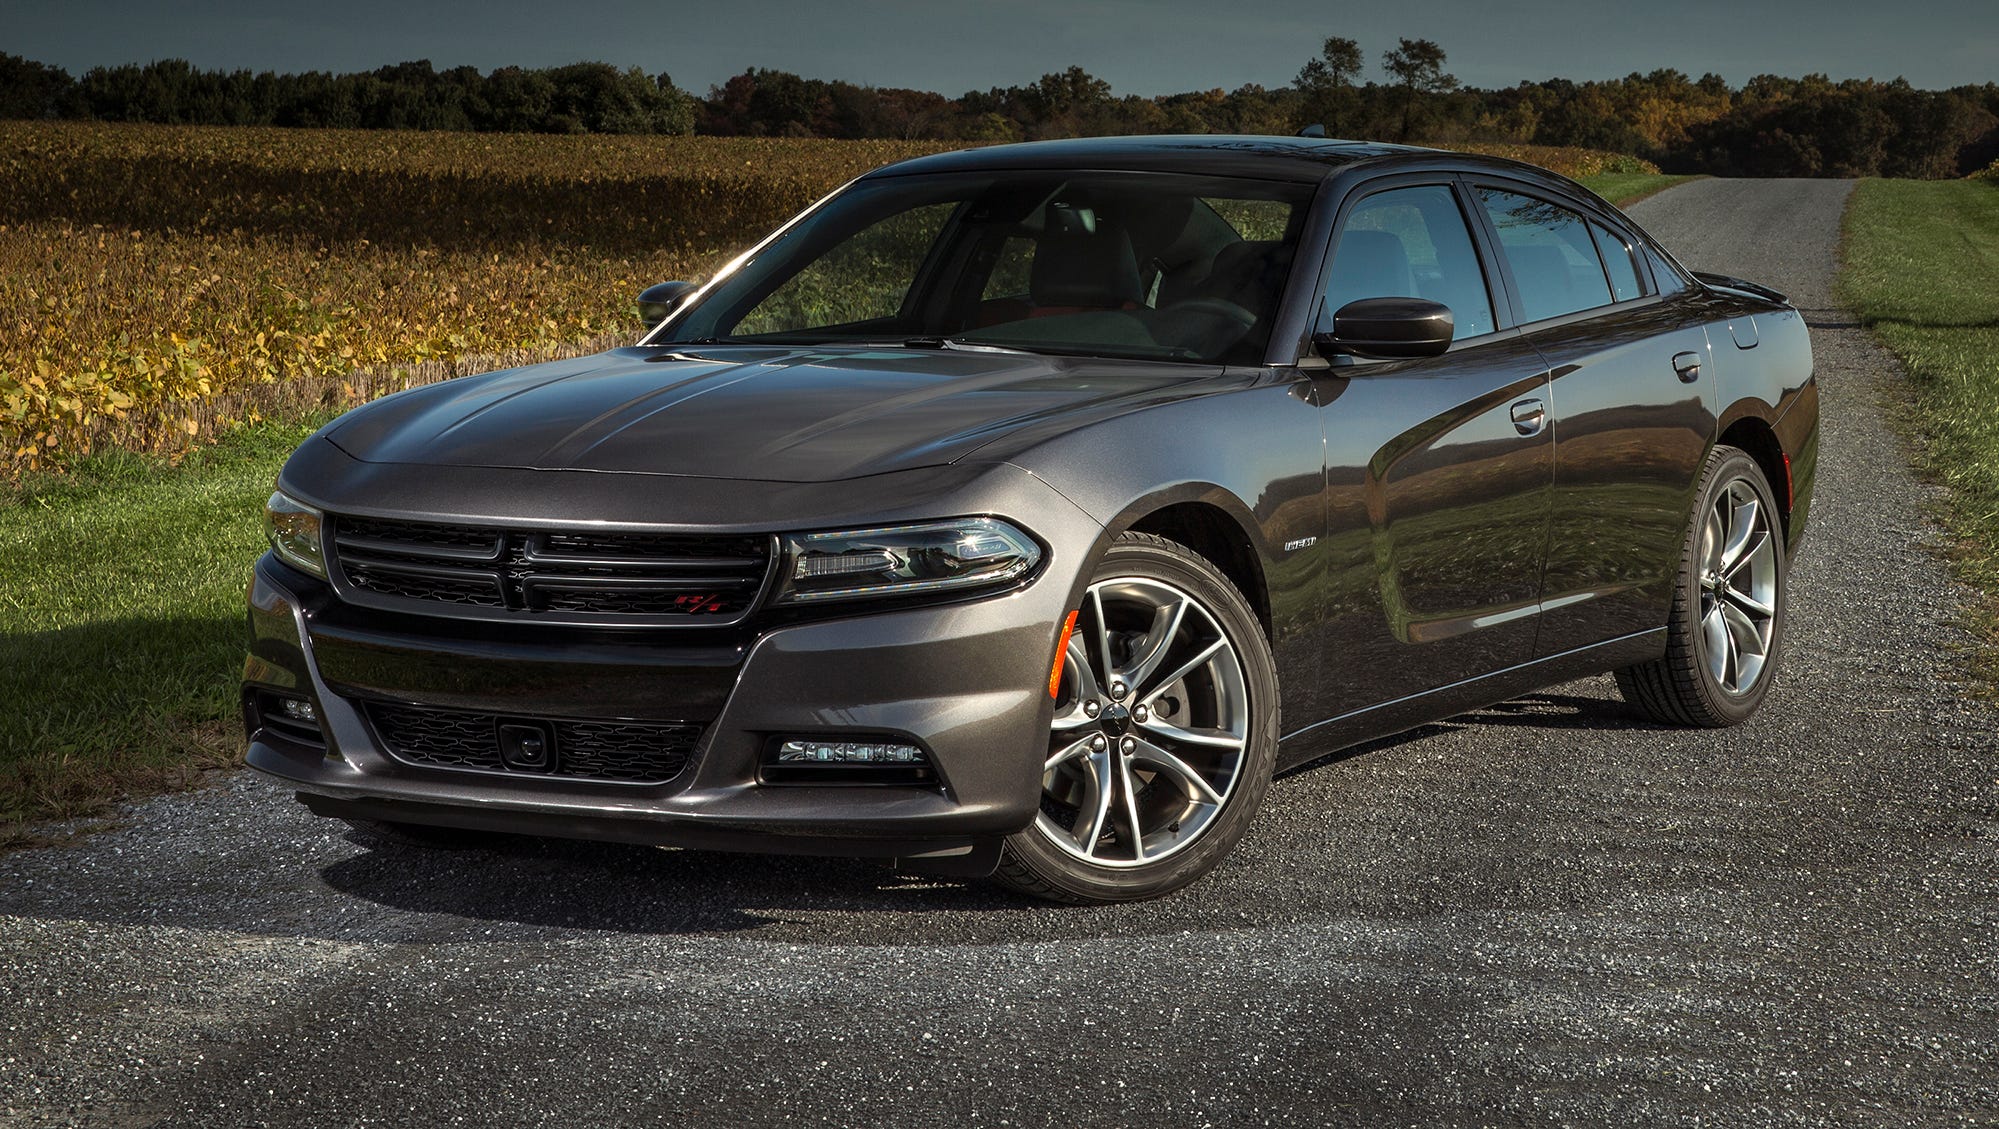 Auto review: Dodge Charger R/T more handsome for 2015